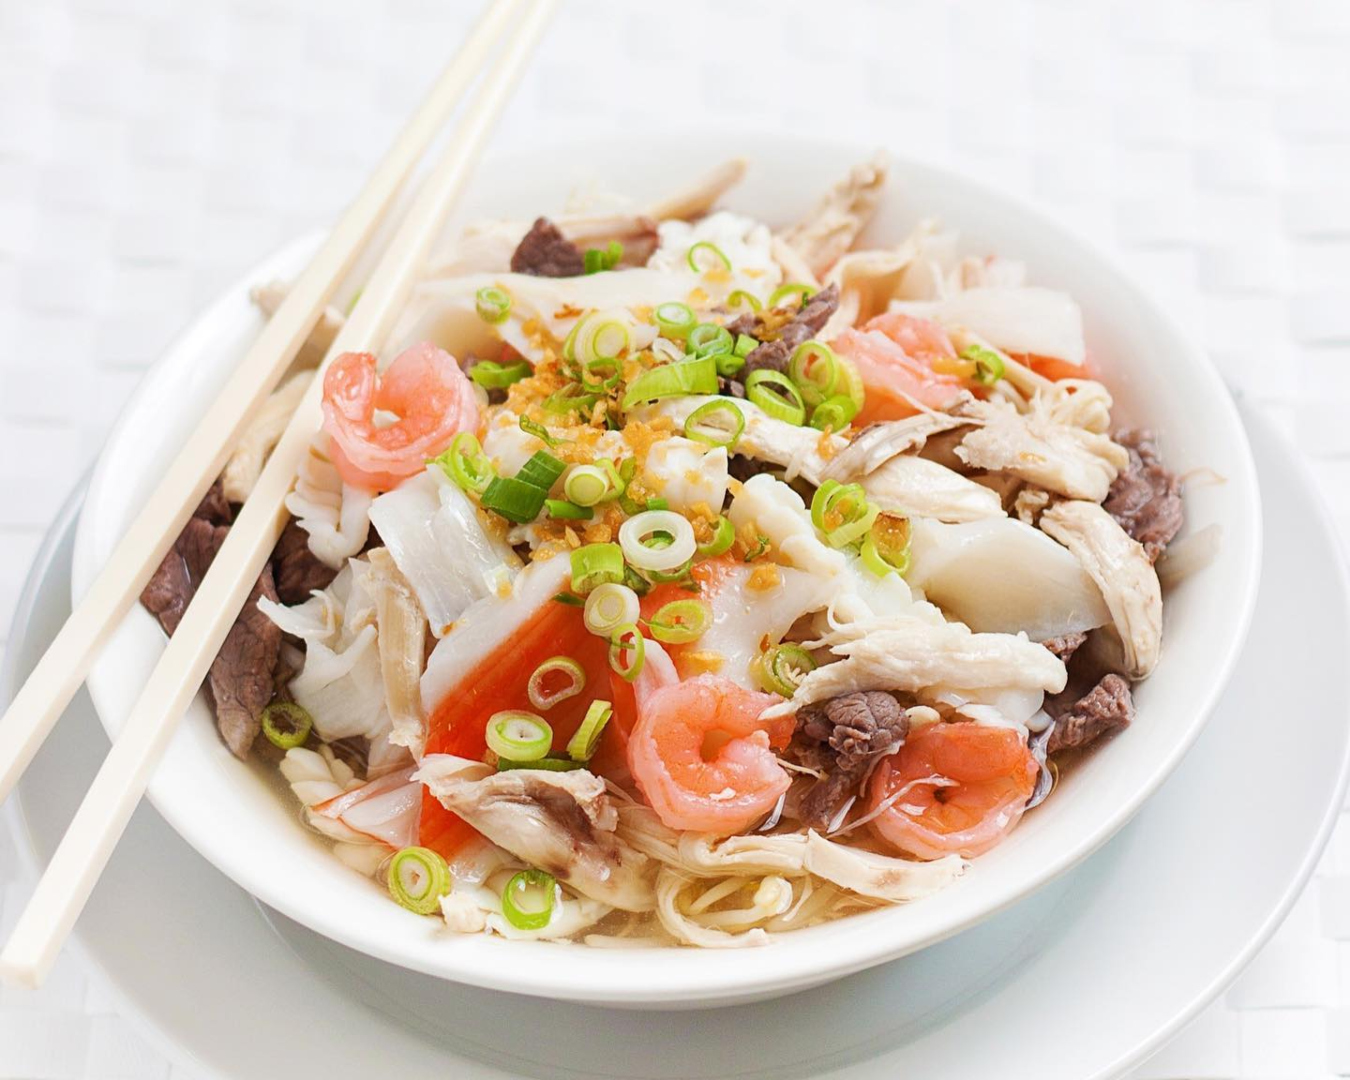 A bowl filled to the brim with noodles, broth and other goodies. 